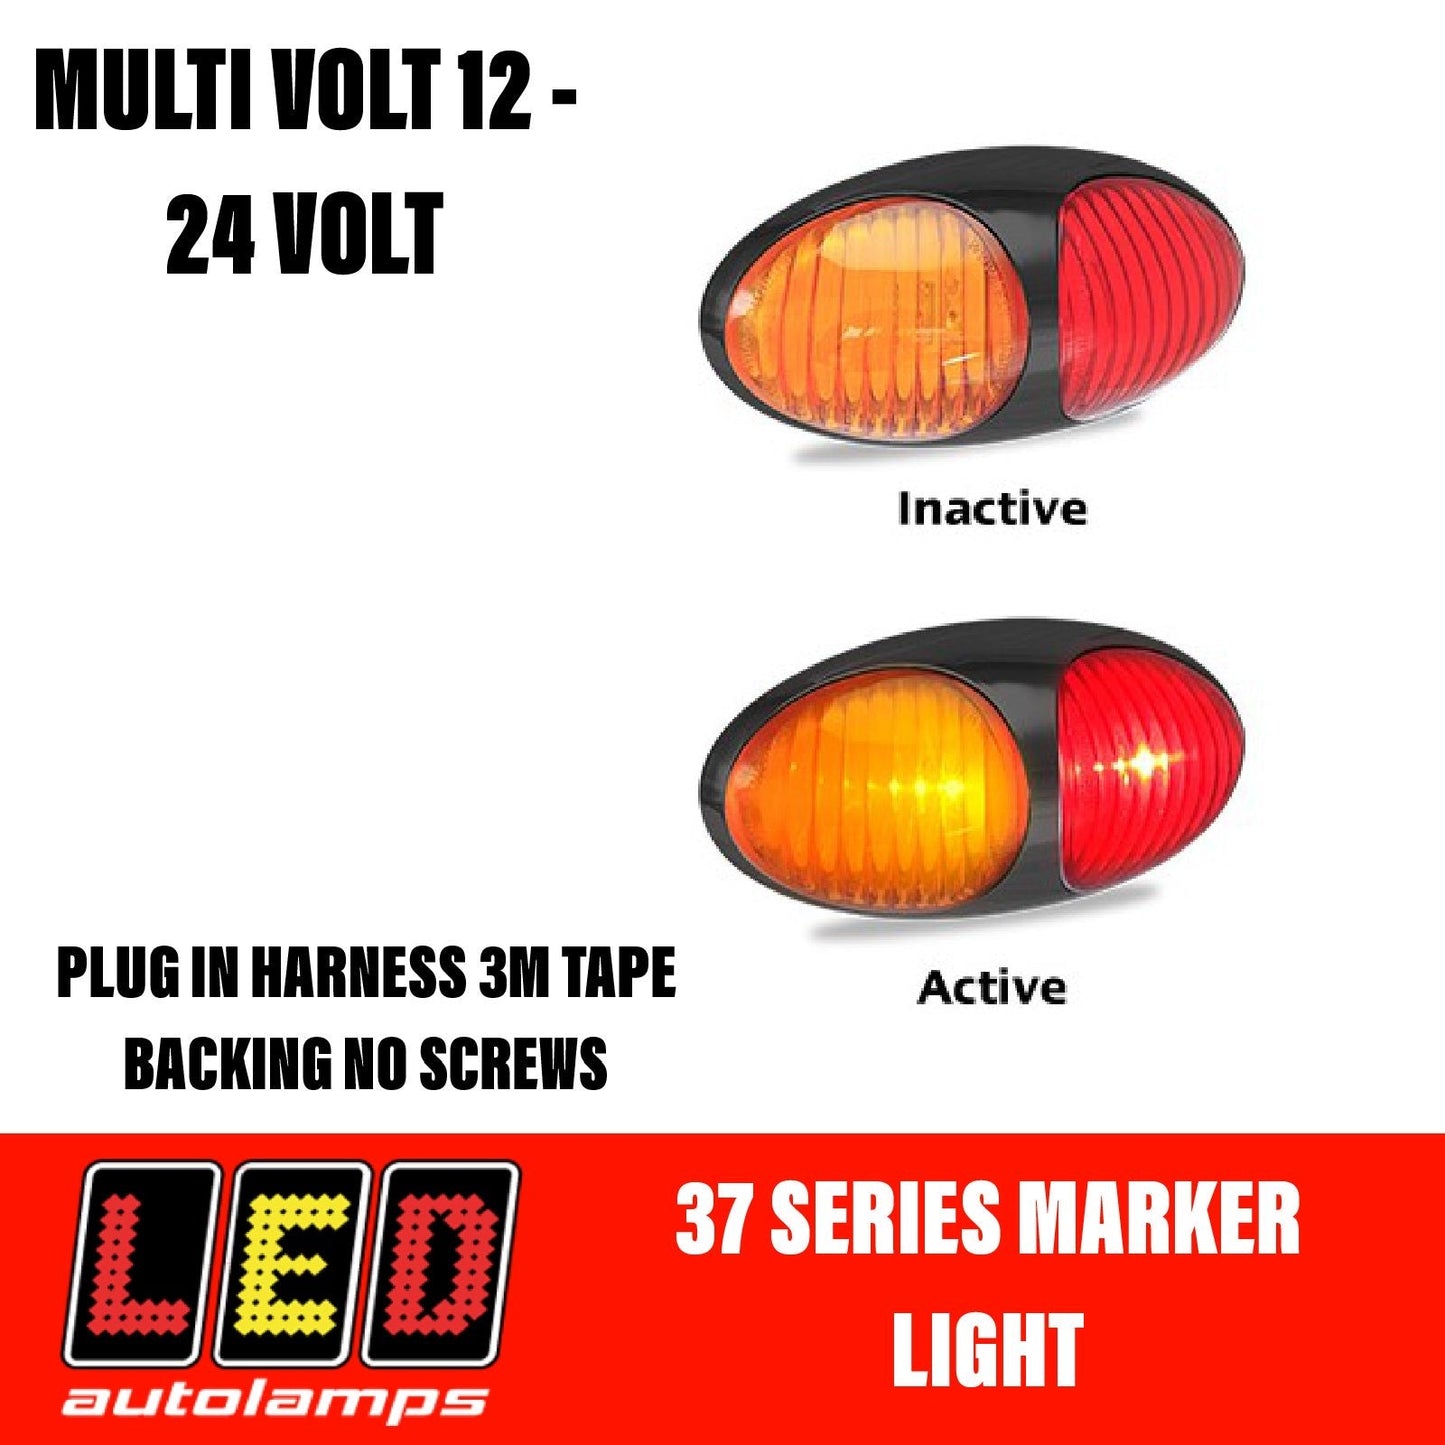 LED AUTOLAMPS Amber/Red Clearance Lamp Easy Fit 3M Tape 5 Year Warranty